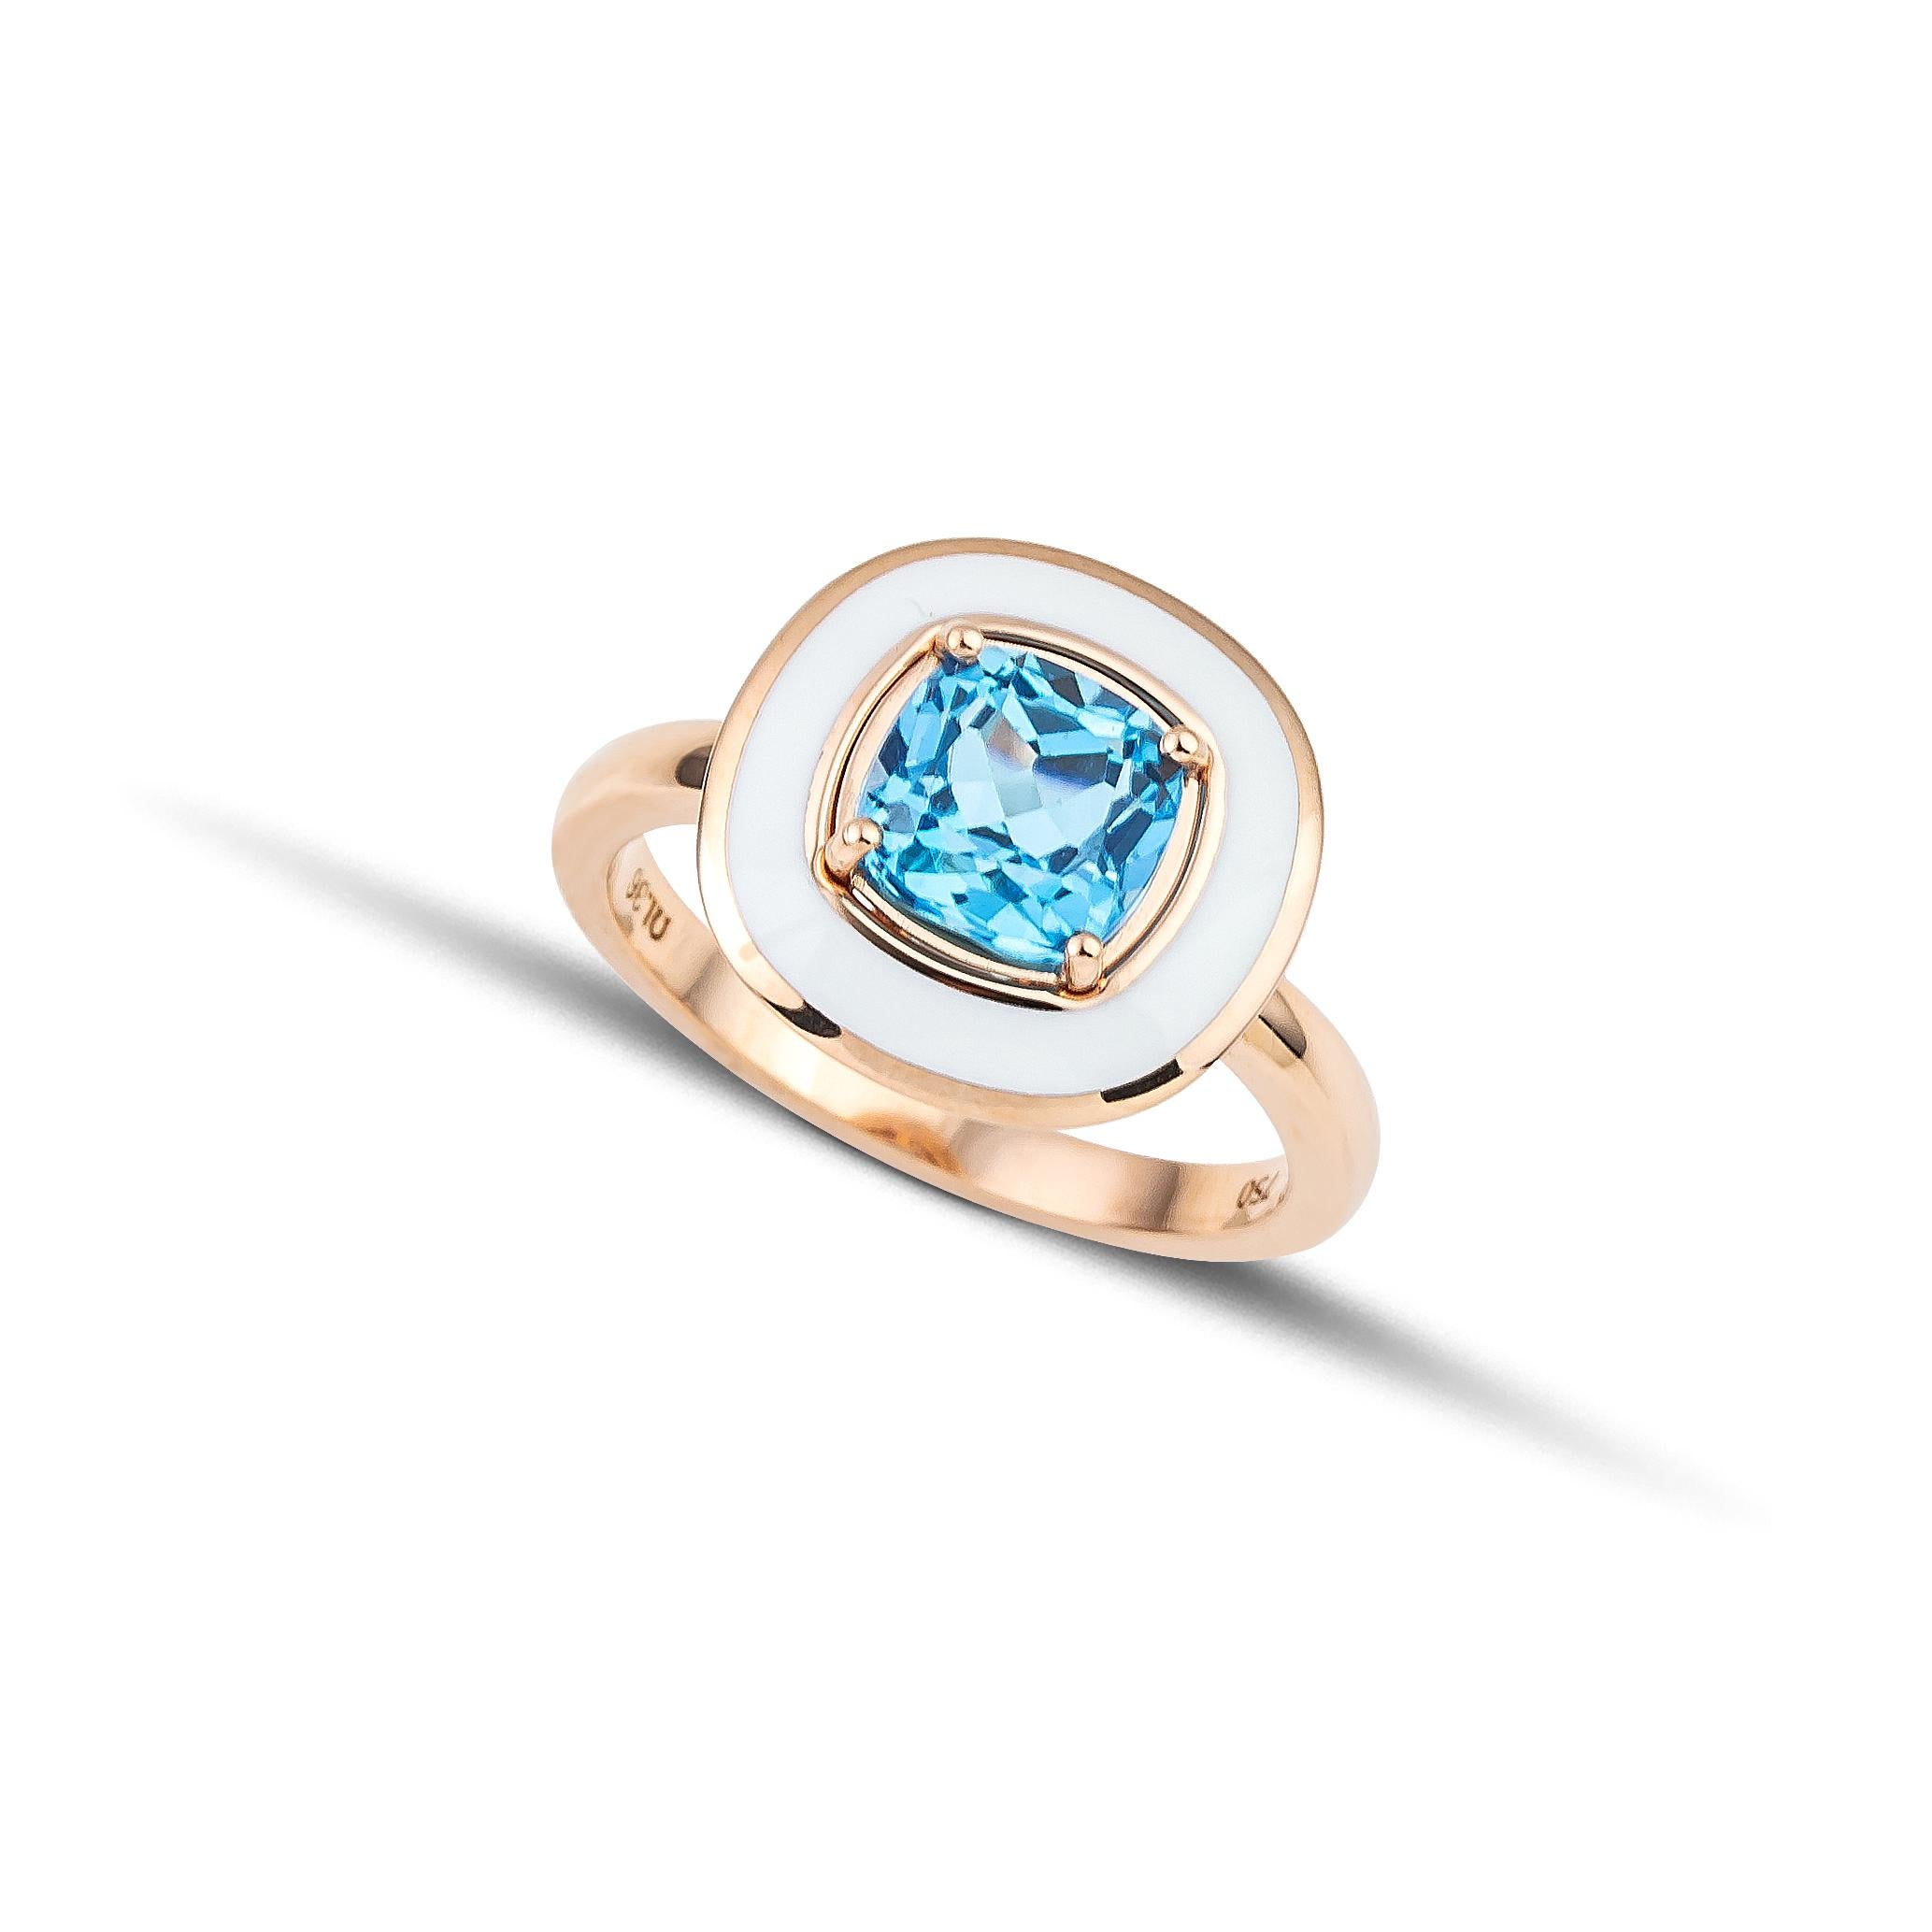 White Enamel Cocktail Ring with 2.15 carat Cushion Blue Topaz made in 18 Kt Rose Gold. 
A unique piece of jewelry handcrafted in 18Kt rose gold with a big 2.15 ct cushion Blue Topaz, set among four gold prongs. A white enamel circle around the Blue